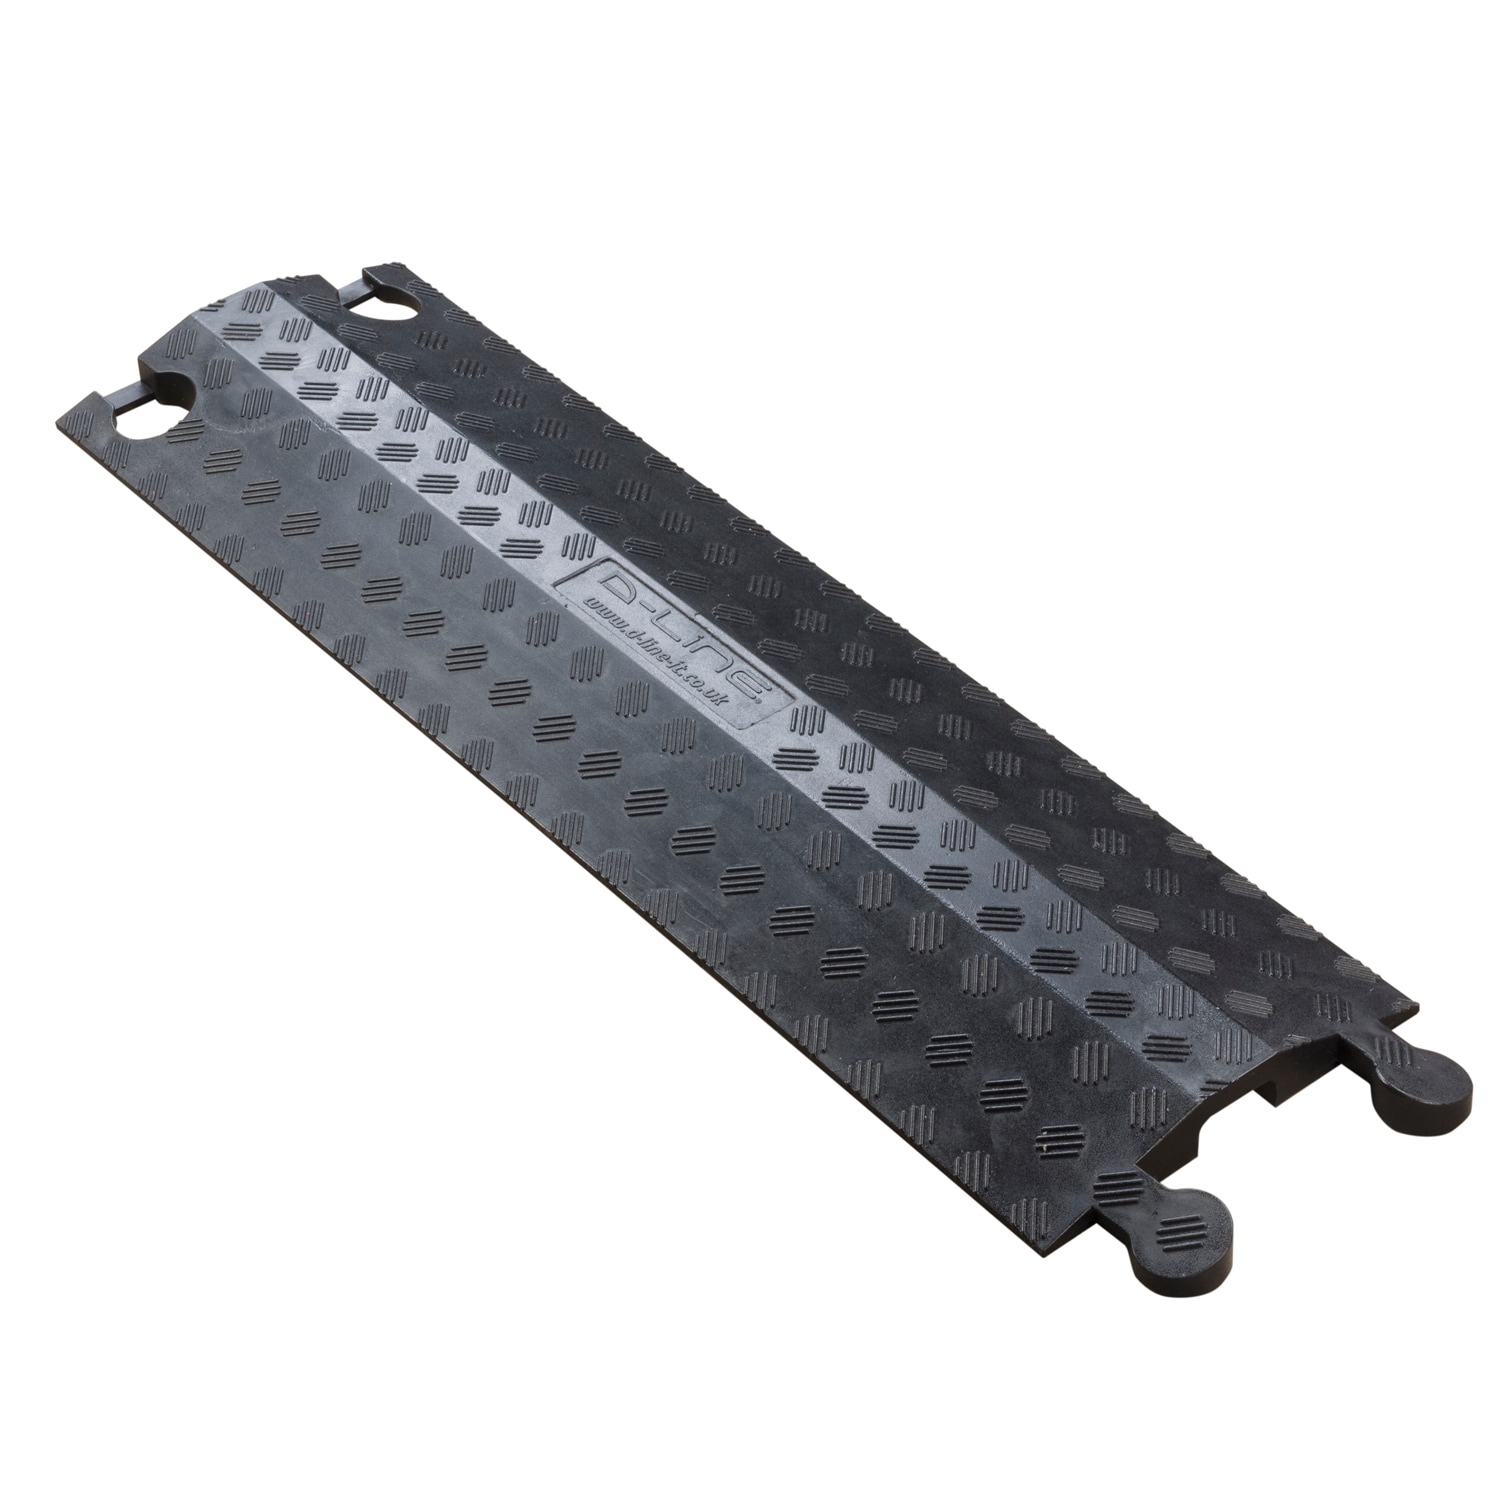 D-Line 30-in x 5.25-in Plastic Black Straight Channel Cord Cover